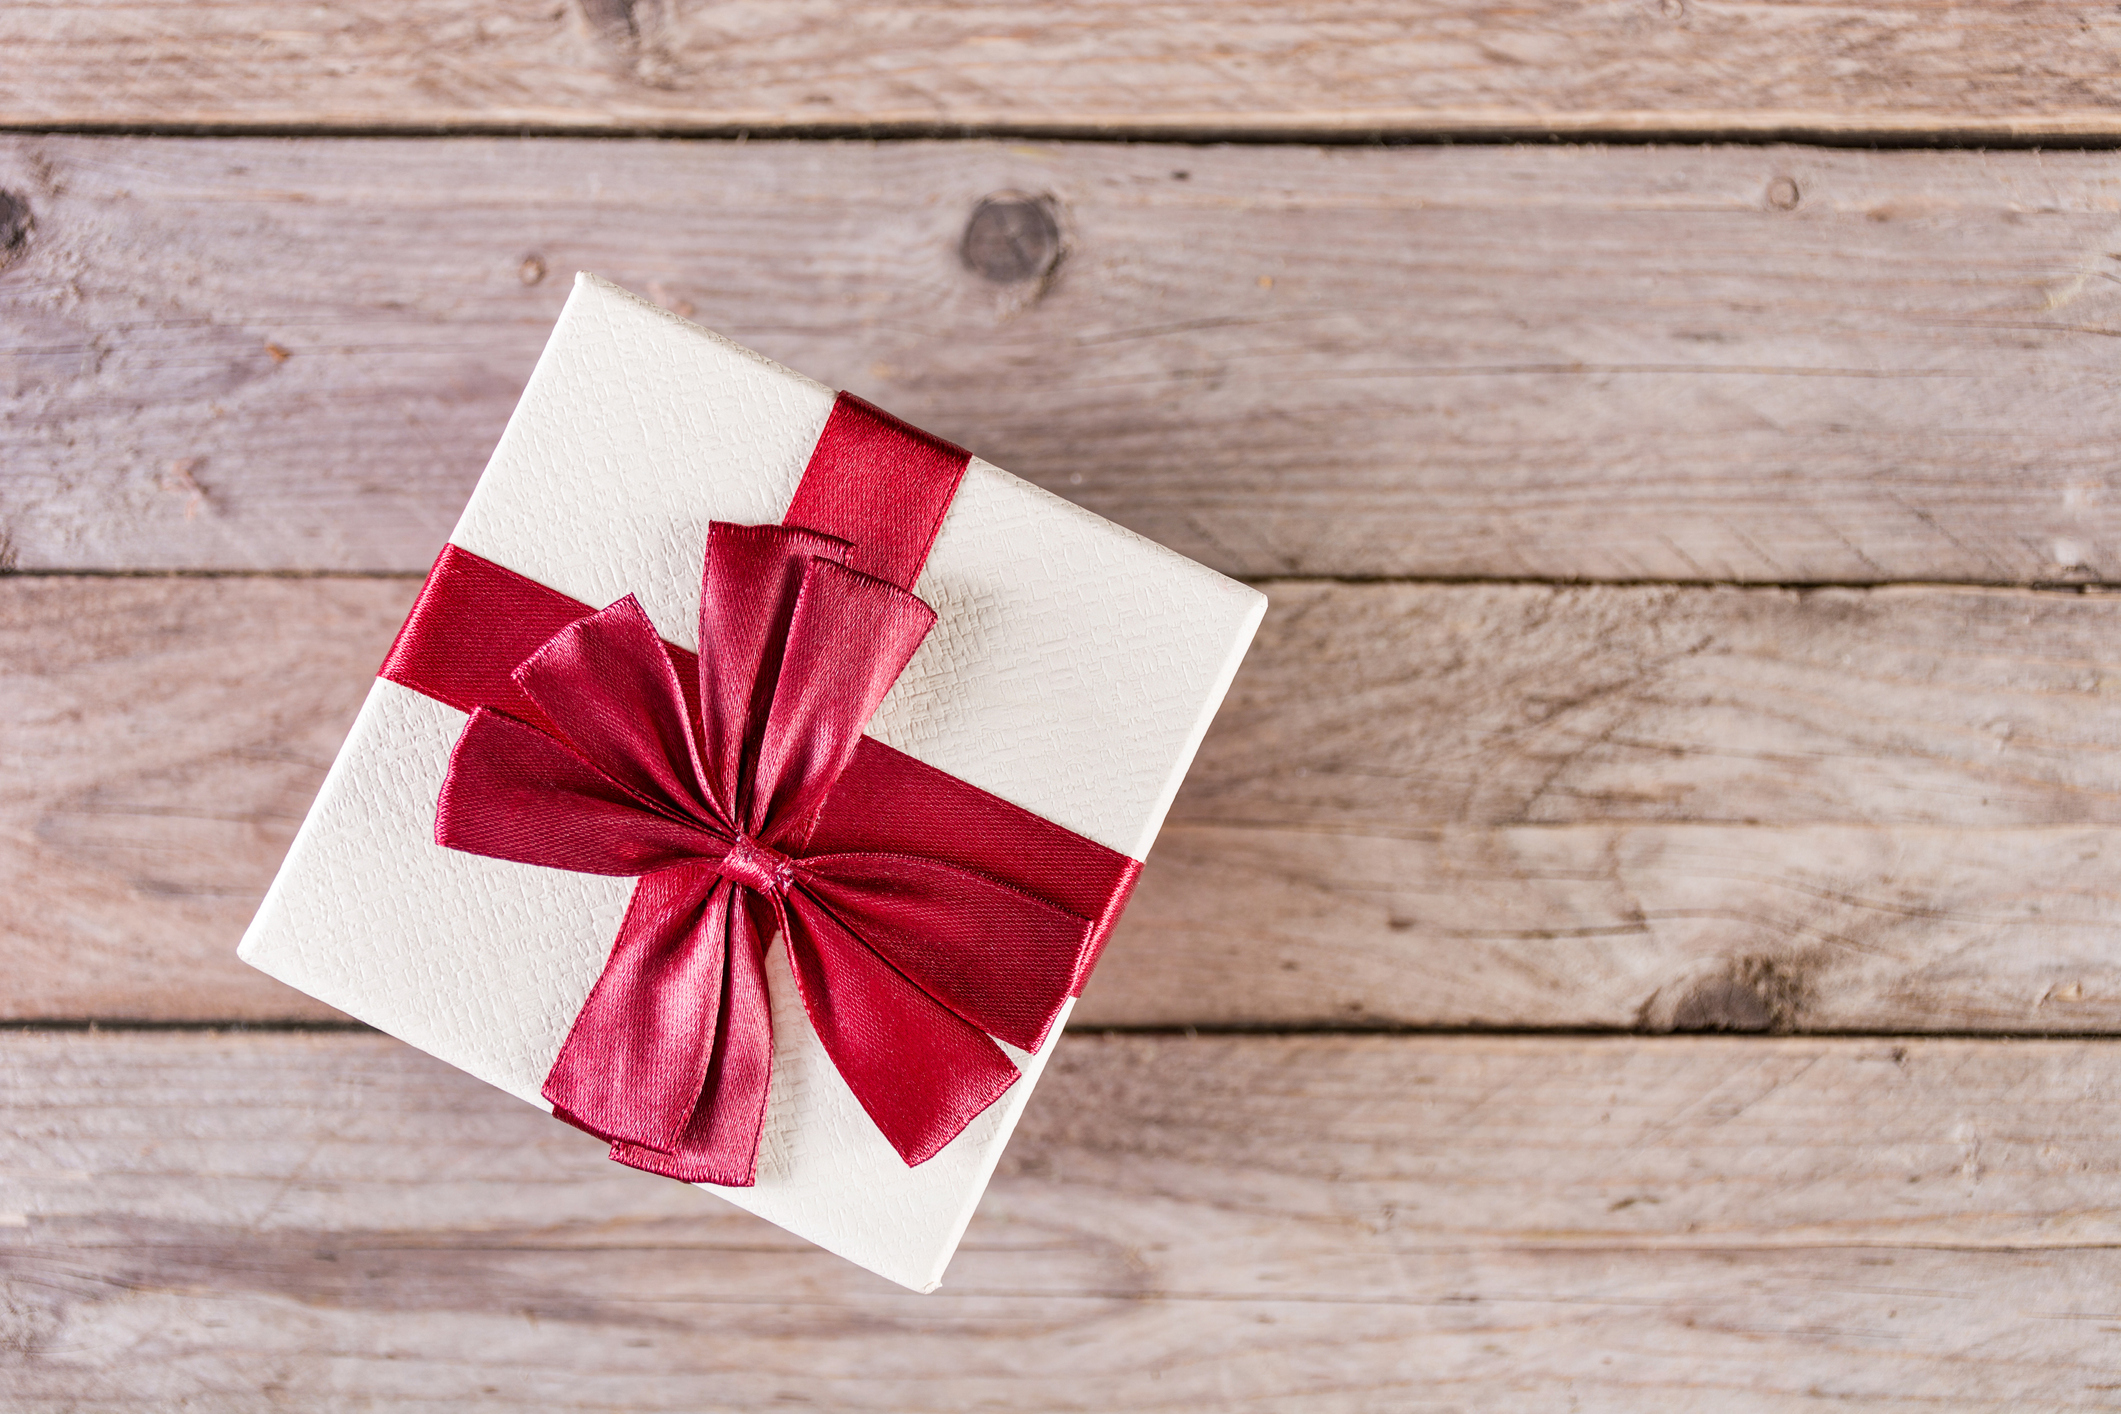 25 Holiday Wish List Must-Haves for Nurses